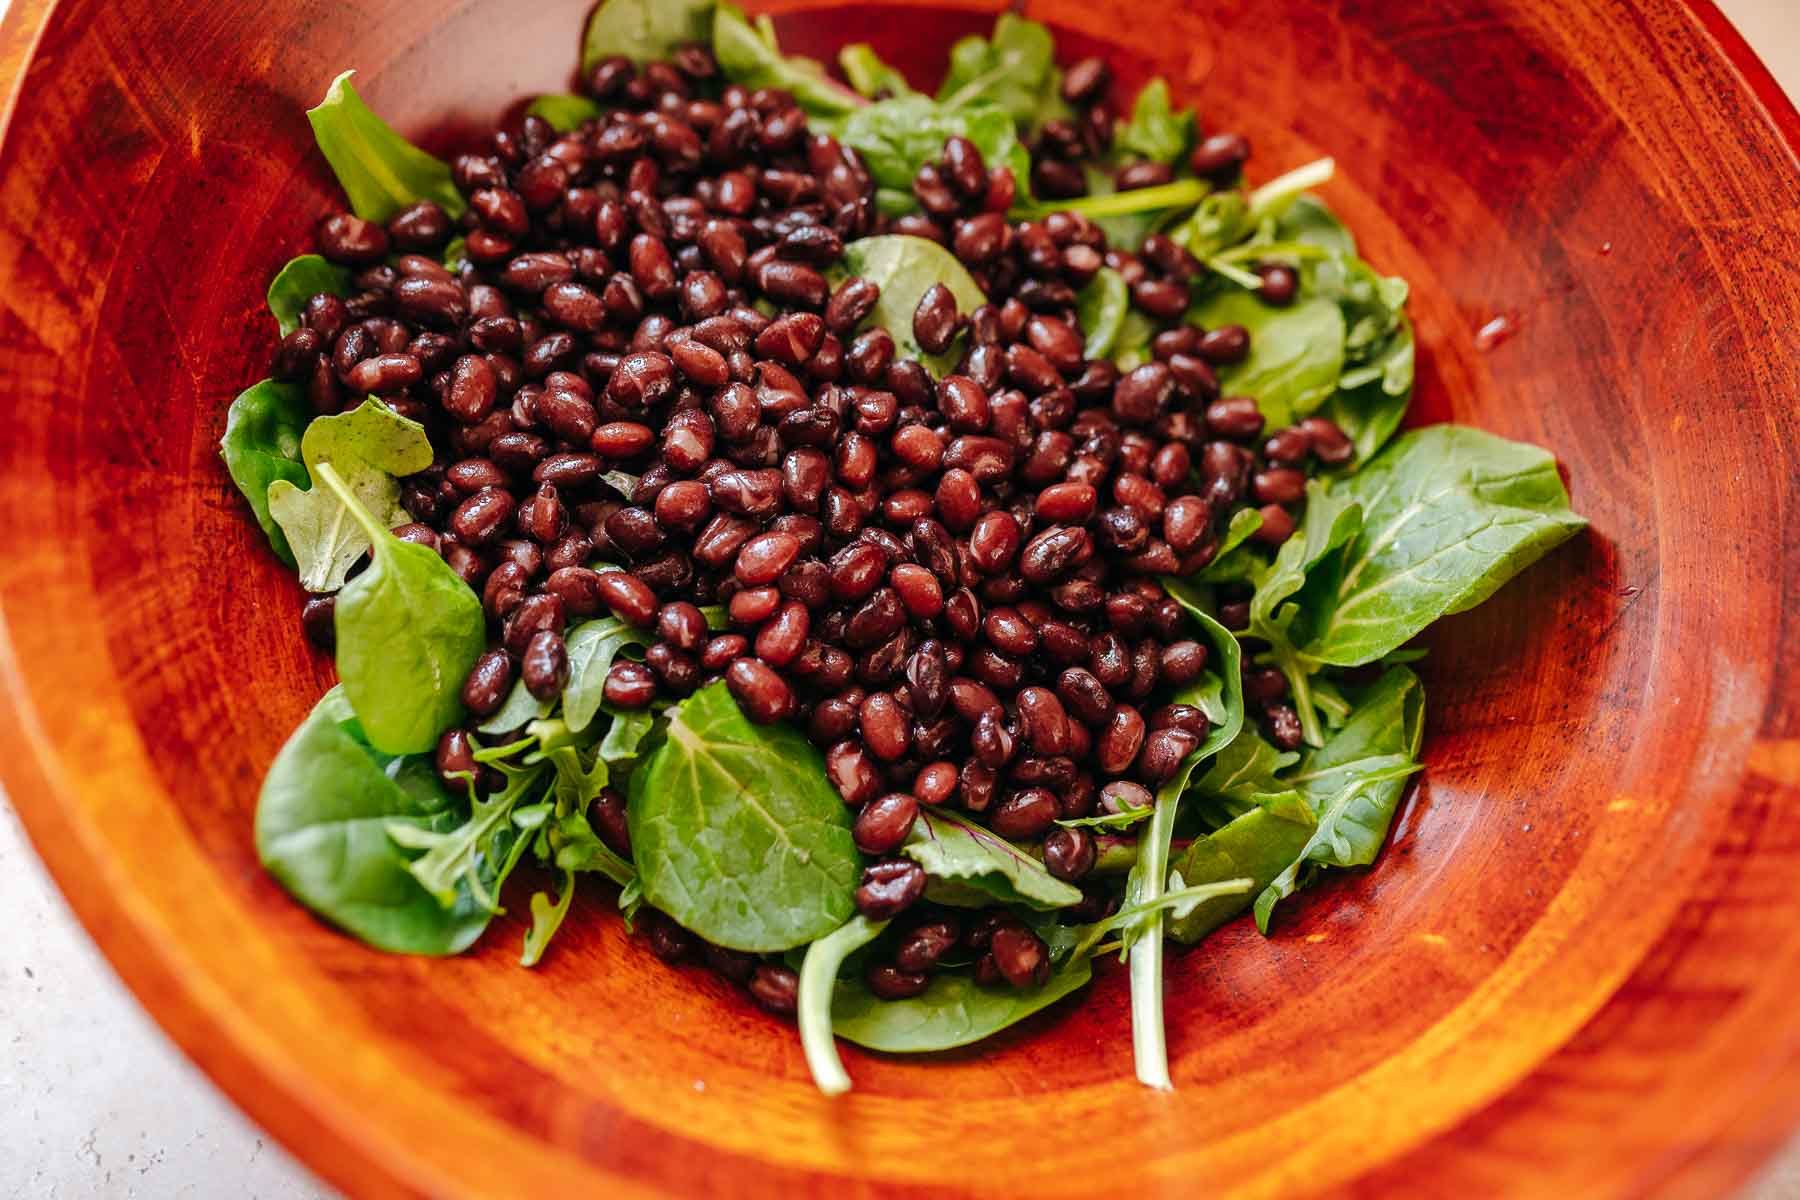 A wooden salad bowl filled with greens and black beans.